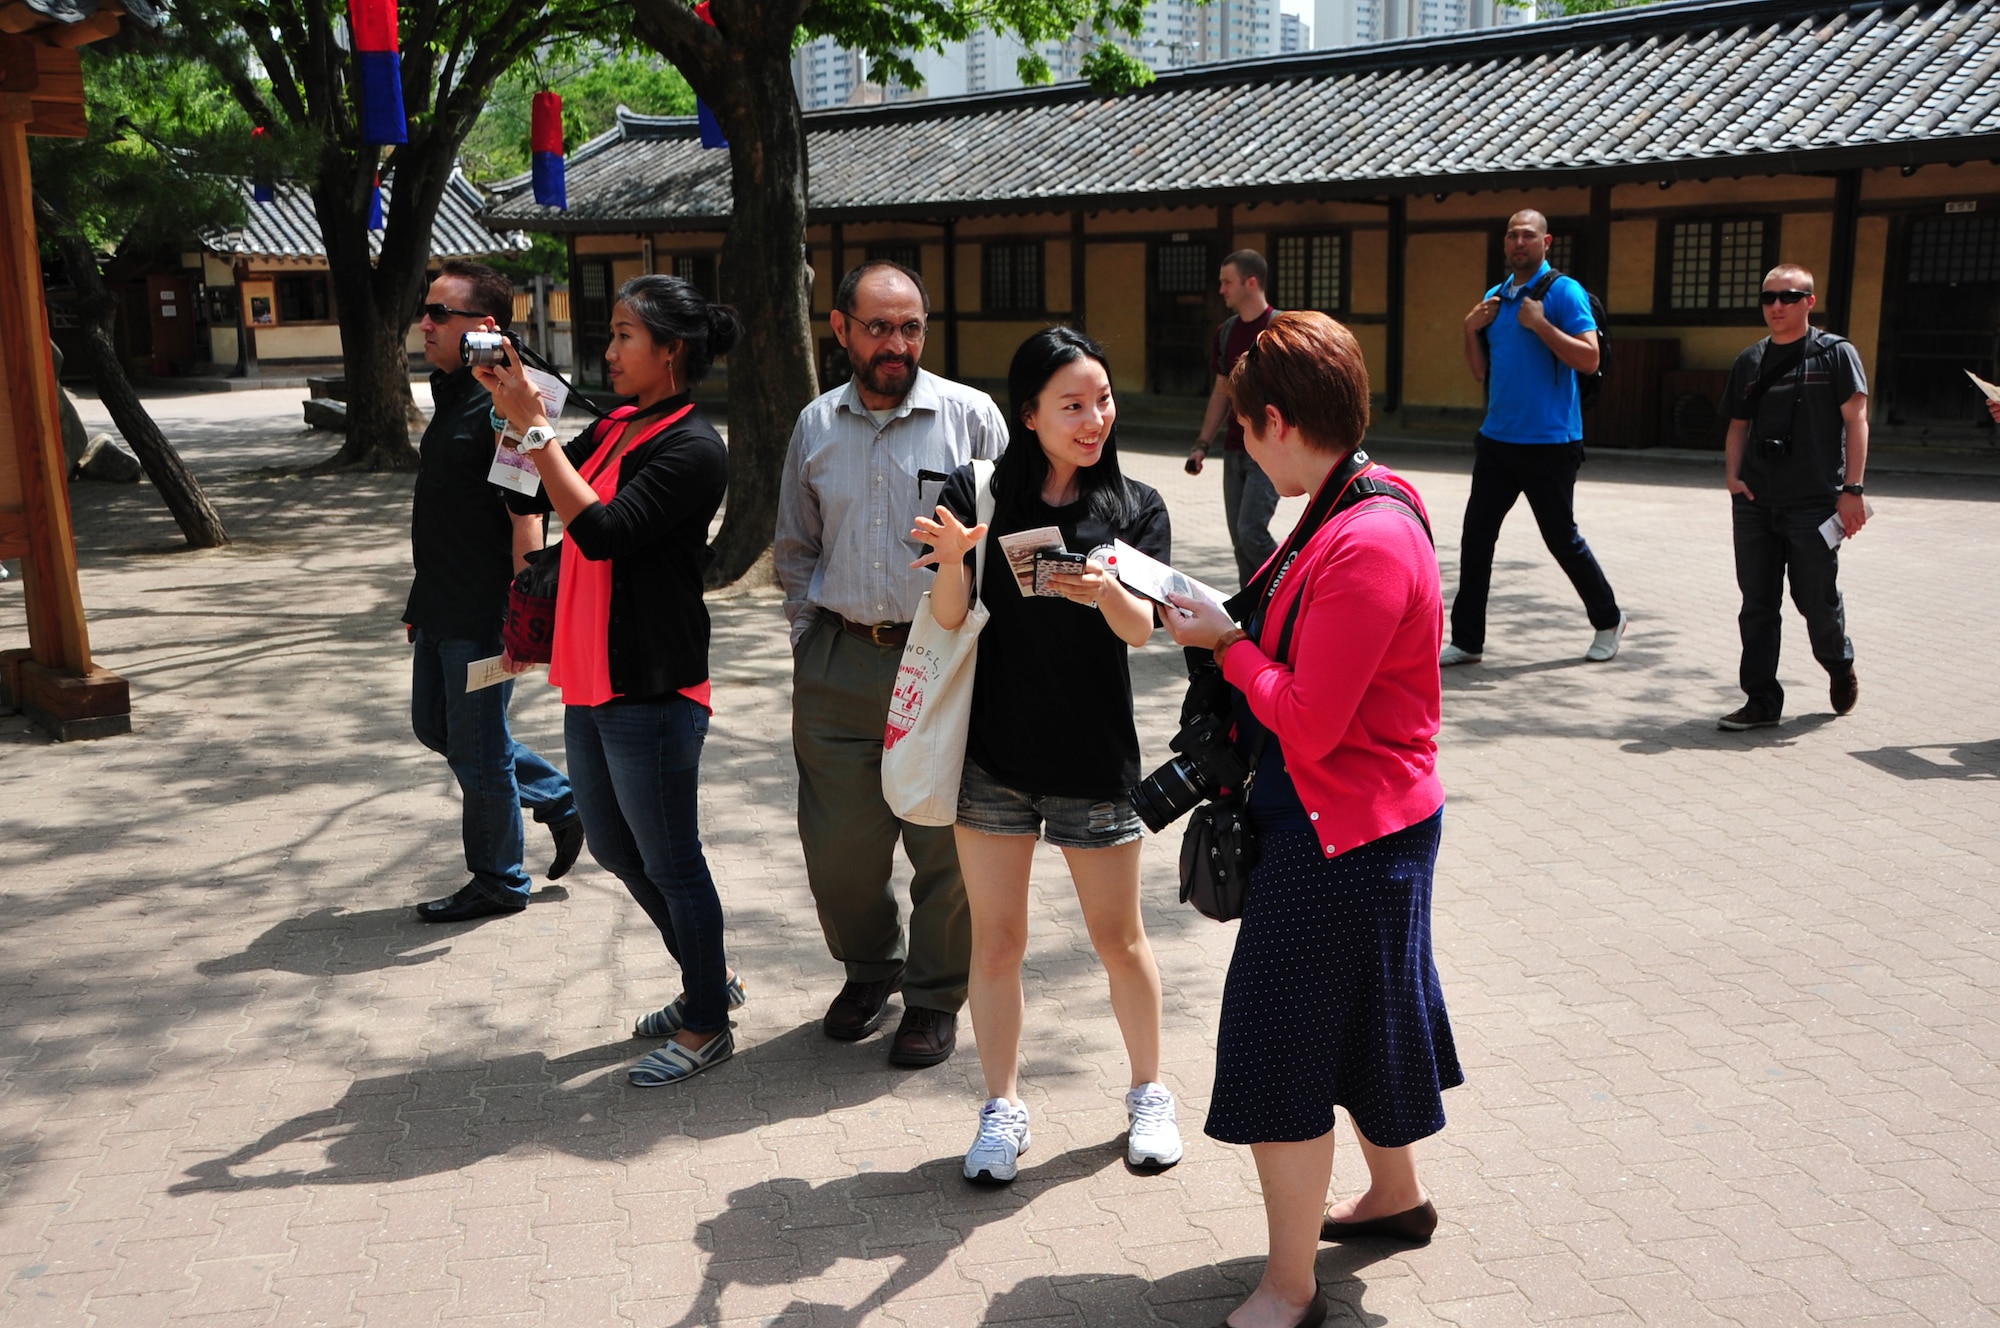 Head Start students tour the Korean Folk Village with Pyeongtaek University students as part of their immersion into Korean history and culture May 16, 2014.  The class is divided into three days. The first two days are spent in a classroom environment where students learn about Korean history, culture and language. The third day is a trip to cultural or historical site such as the Korean Folk Village or the DMZ. The class is taught by instructors at Pyeongtaek University and funded completely by the government of Gyeonggi-do. (U.S. Air Force photo by Tech. Sgt. Thomas J. Doscher)